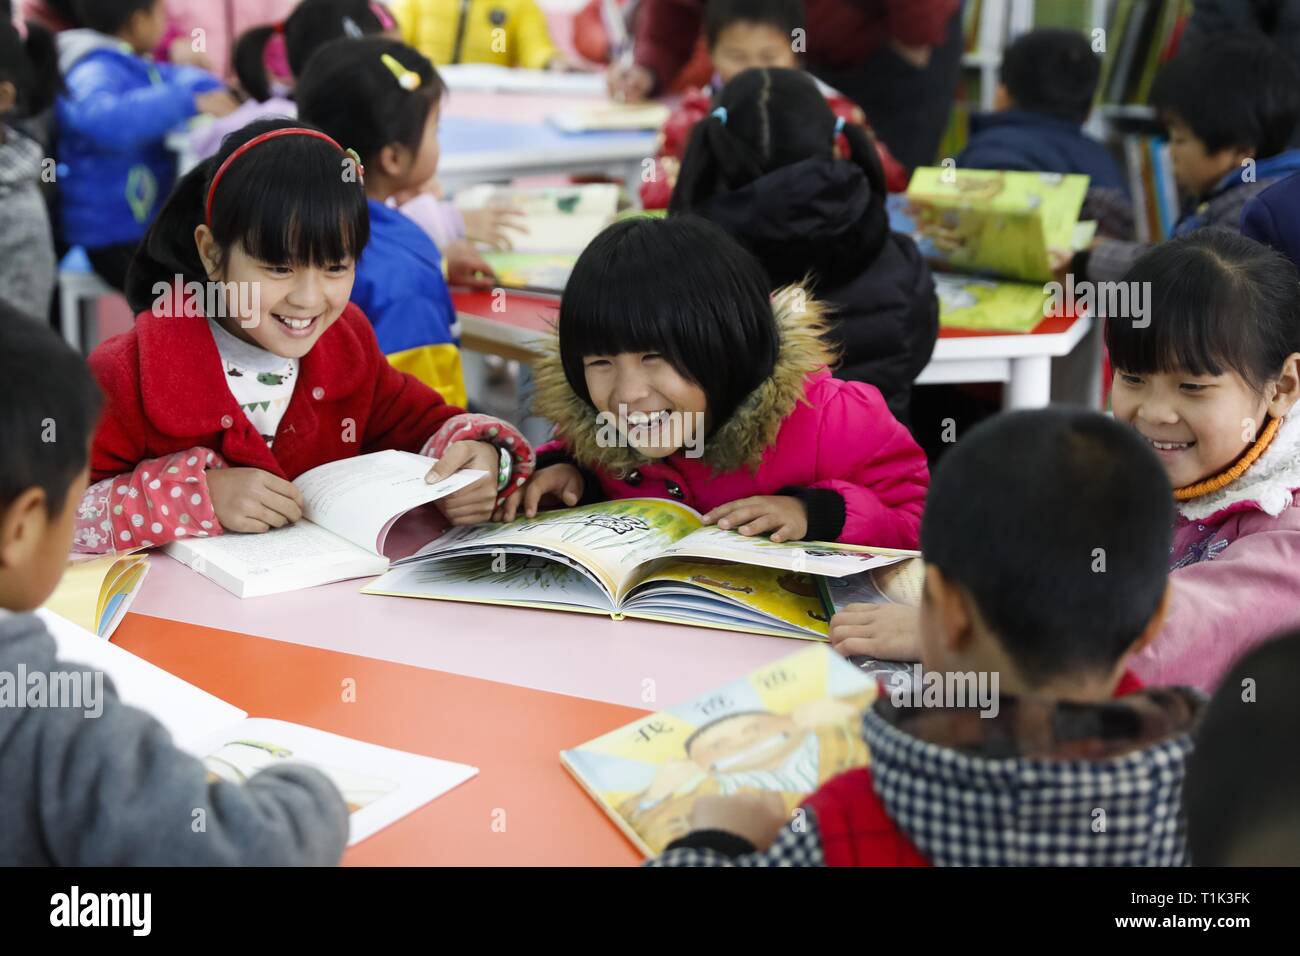 (190327) -- BEIJING, March 27, 2019 (Xinhua) -- Students read books during a reading lesson at Quyang Primary School in Yudu County, east China's Jiangxi Province, Feb. 23, 2017. China's efforts to promote the 'balanced development' of compulsory education, which usually means narrowing inter-regional, rural-urban or inter-school gaps in terms of education conditions and quality, has borne fruit, the Ministry of Education said Tuesday.     According to the ministry, the balanced development of compulsory education has been achieved in 2,717 counties, representing 92.7 percent of counties acros Stock Photo